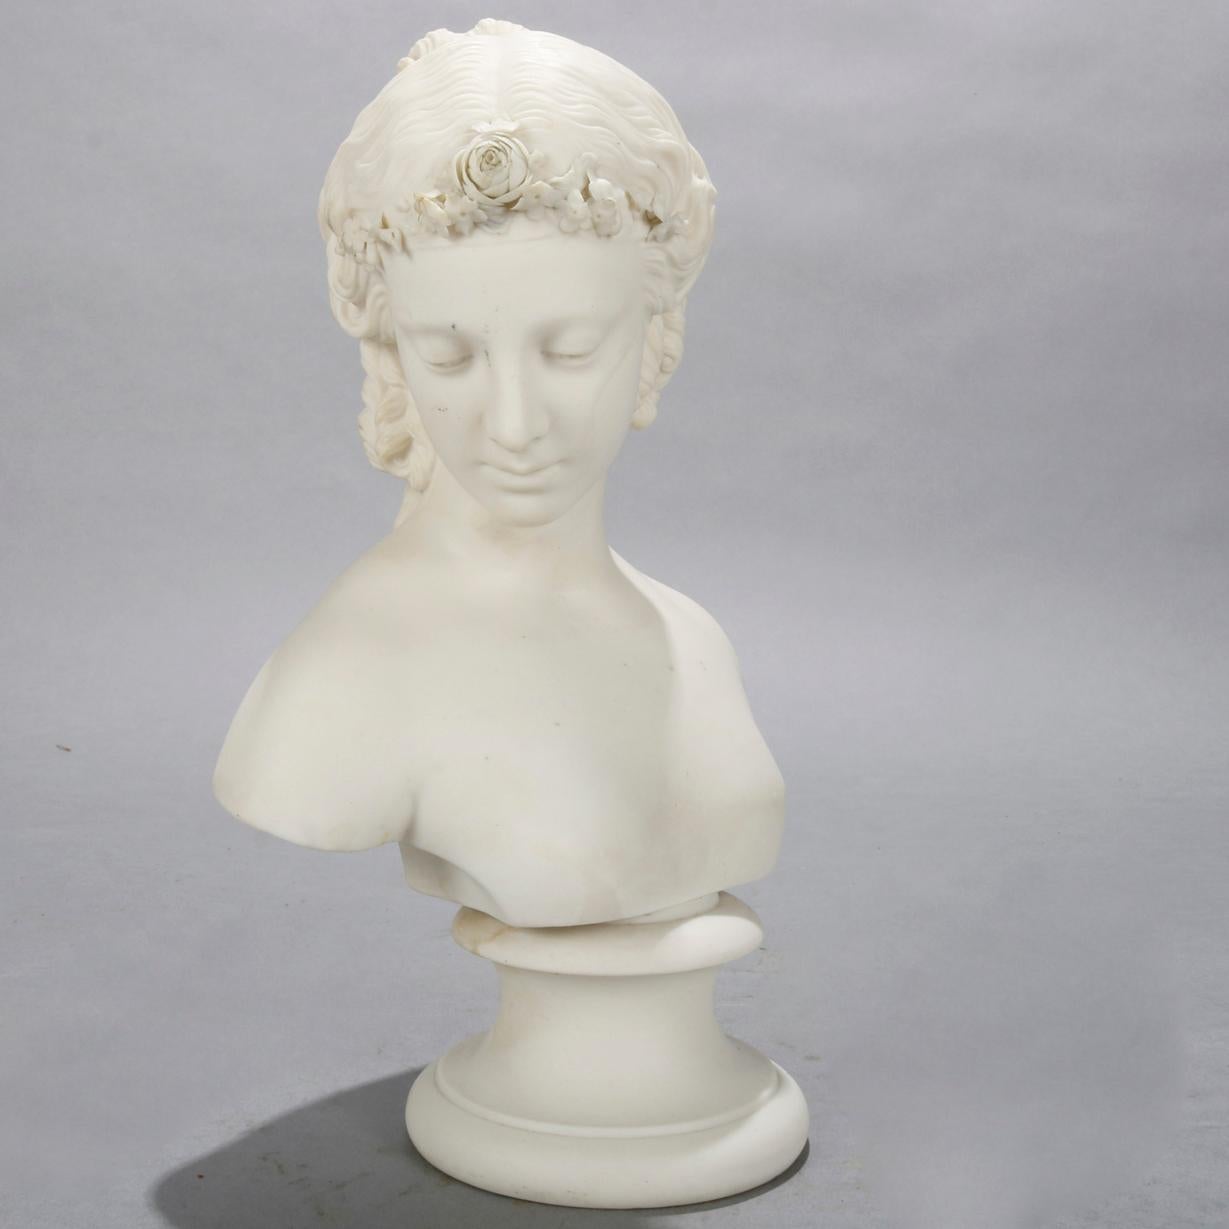 Molded Antique Classical Grecian Parian Portrait Bust of a Woman by Copeland circa 1890